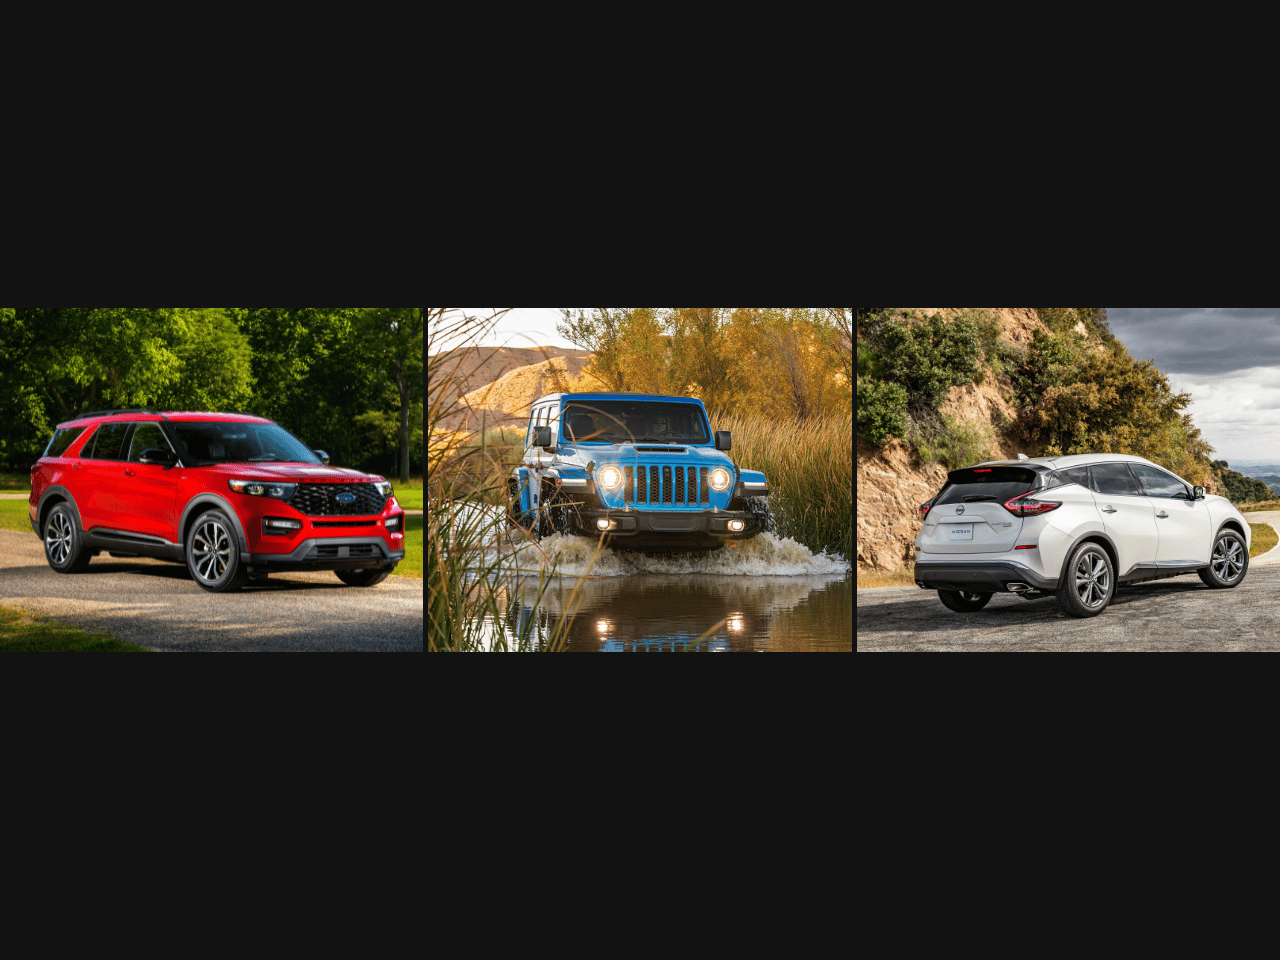 Ford Explorer, Jeep Wrangler, and Nissan Murano compared side by side